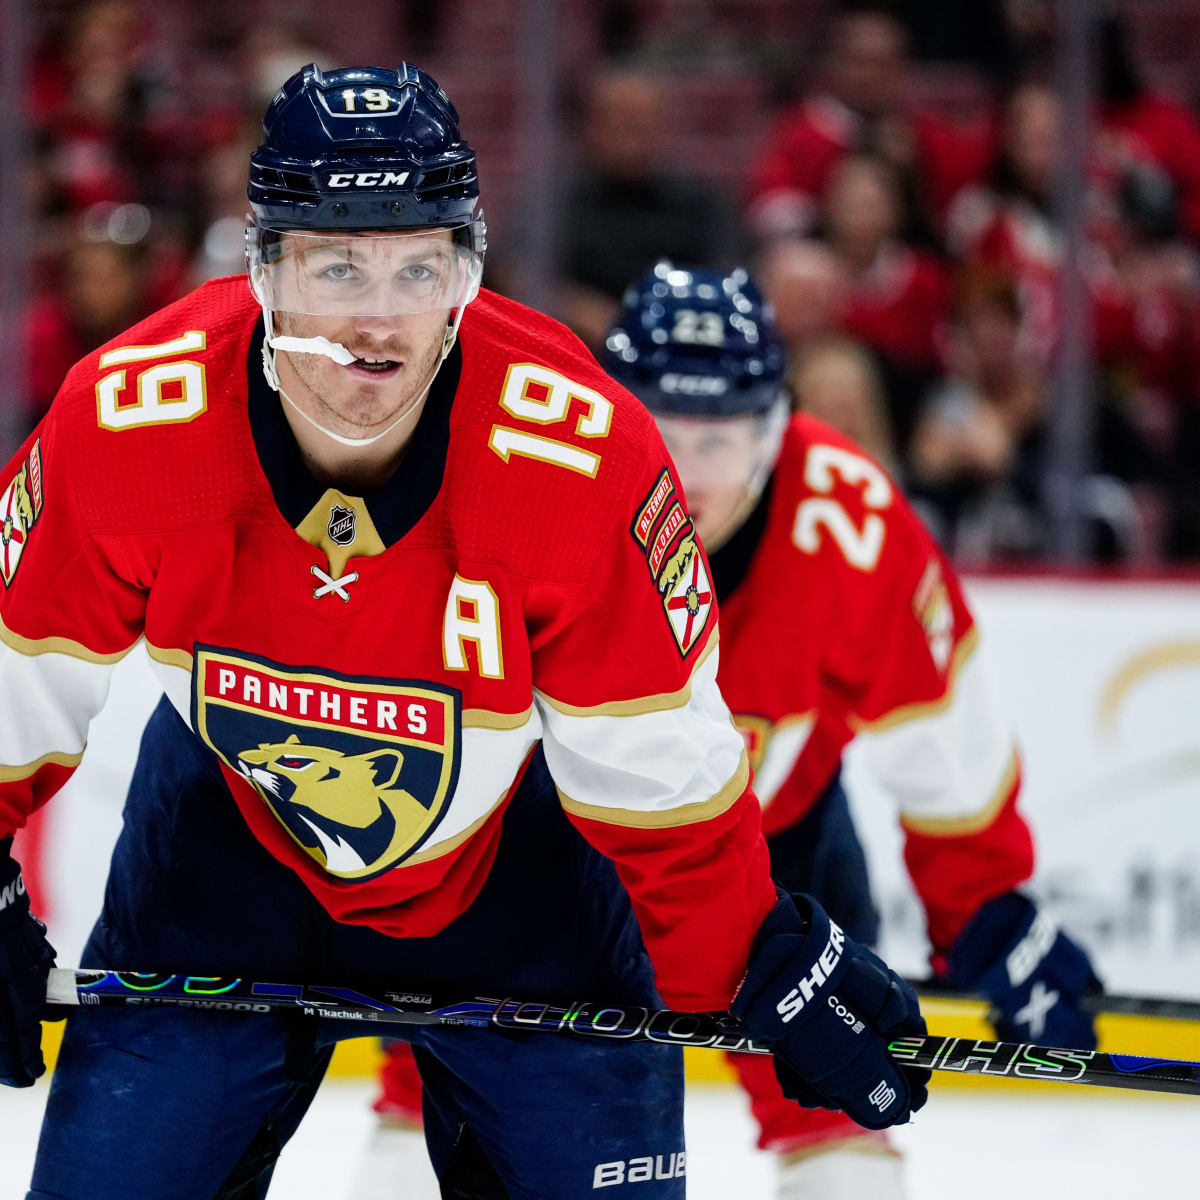 Former Florida Panthers find similarities in current team as they aim for  Stanley Cup - WSVN 7News, Miami News, Weather, Sports